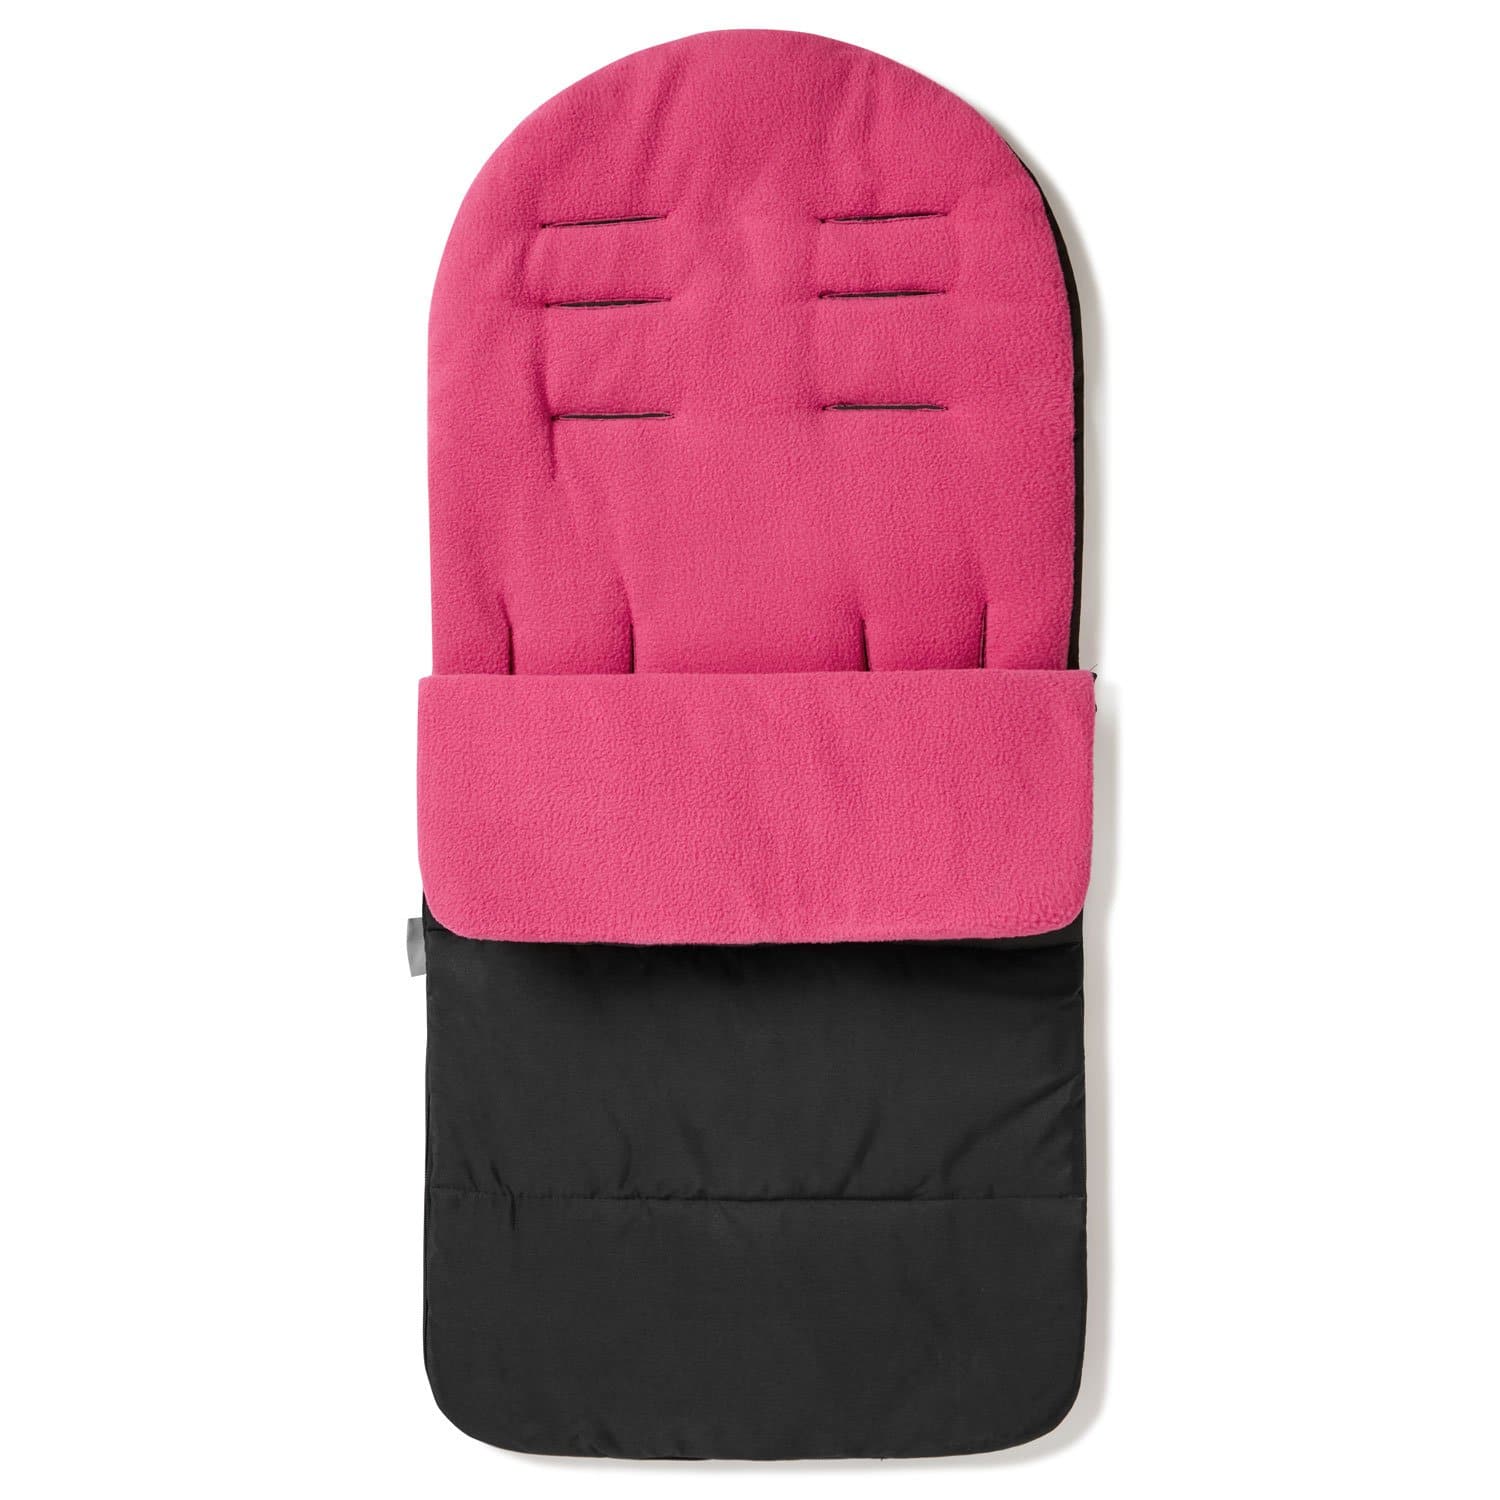 Premium Footmuff / Cosy Toes Compatible with Egg - Pink Rose / Fits All Models | For Your Little One